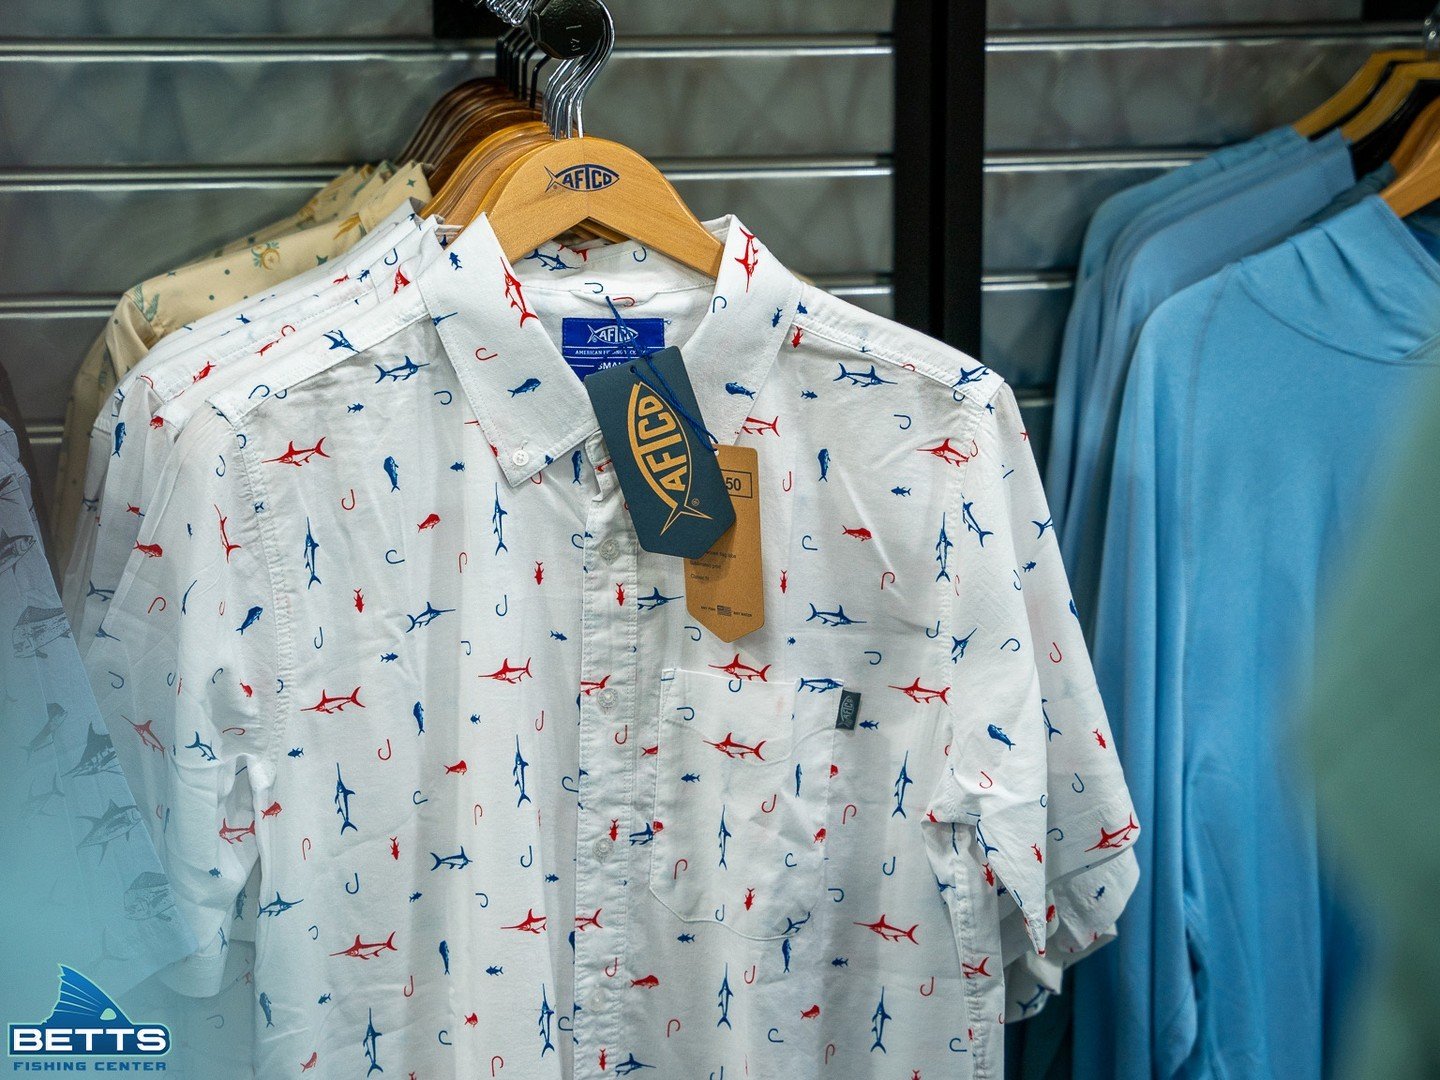 Who says sun-protecting shirts can't be stylish? Dive into our extensive AFTCO selection available now at Betts Fishing Center and discover the perfect blend of protection and fashion!

#saltwaterfishing #fishing #fishinglife #fish #catchandrelease #